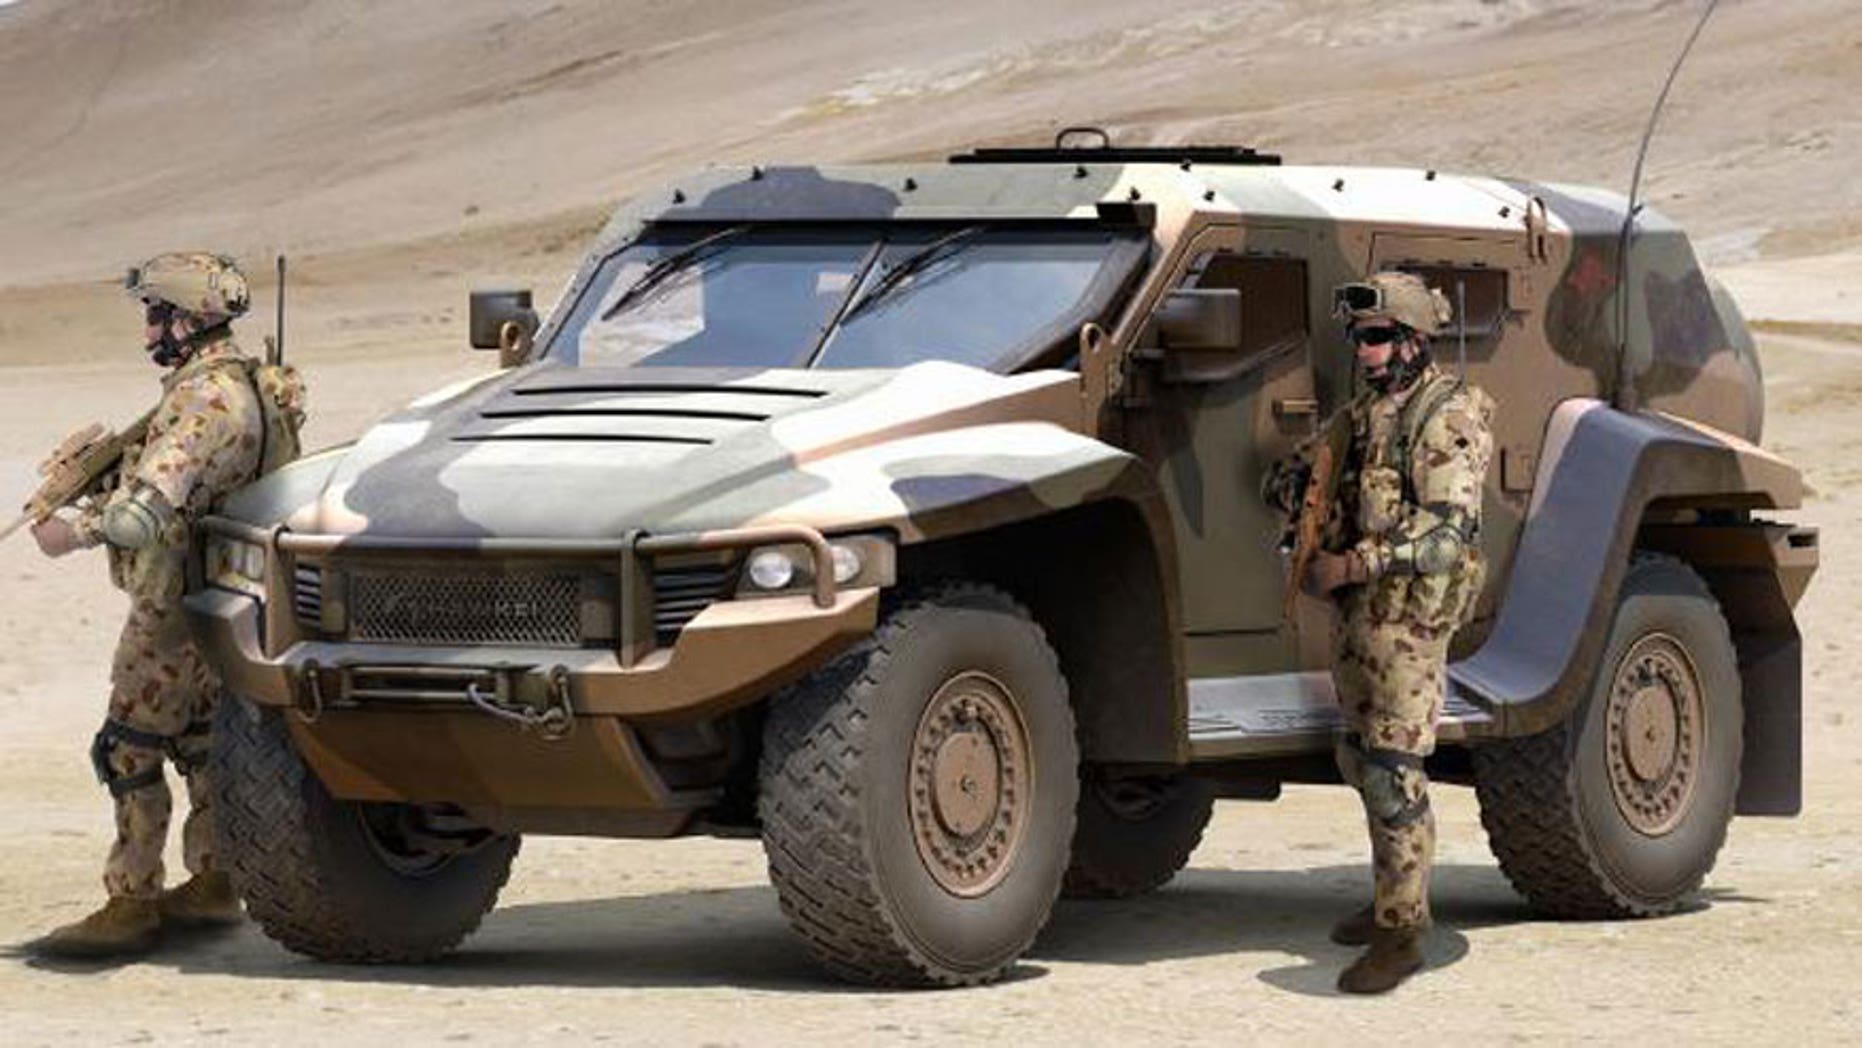 Hawkei Armored Patrol Vehicle Hits The Mark For Australian Military